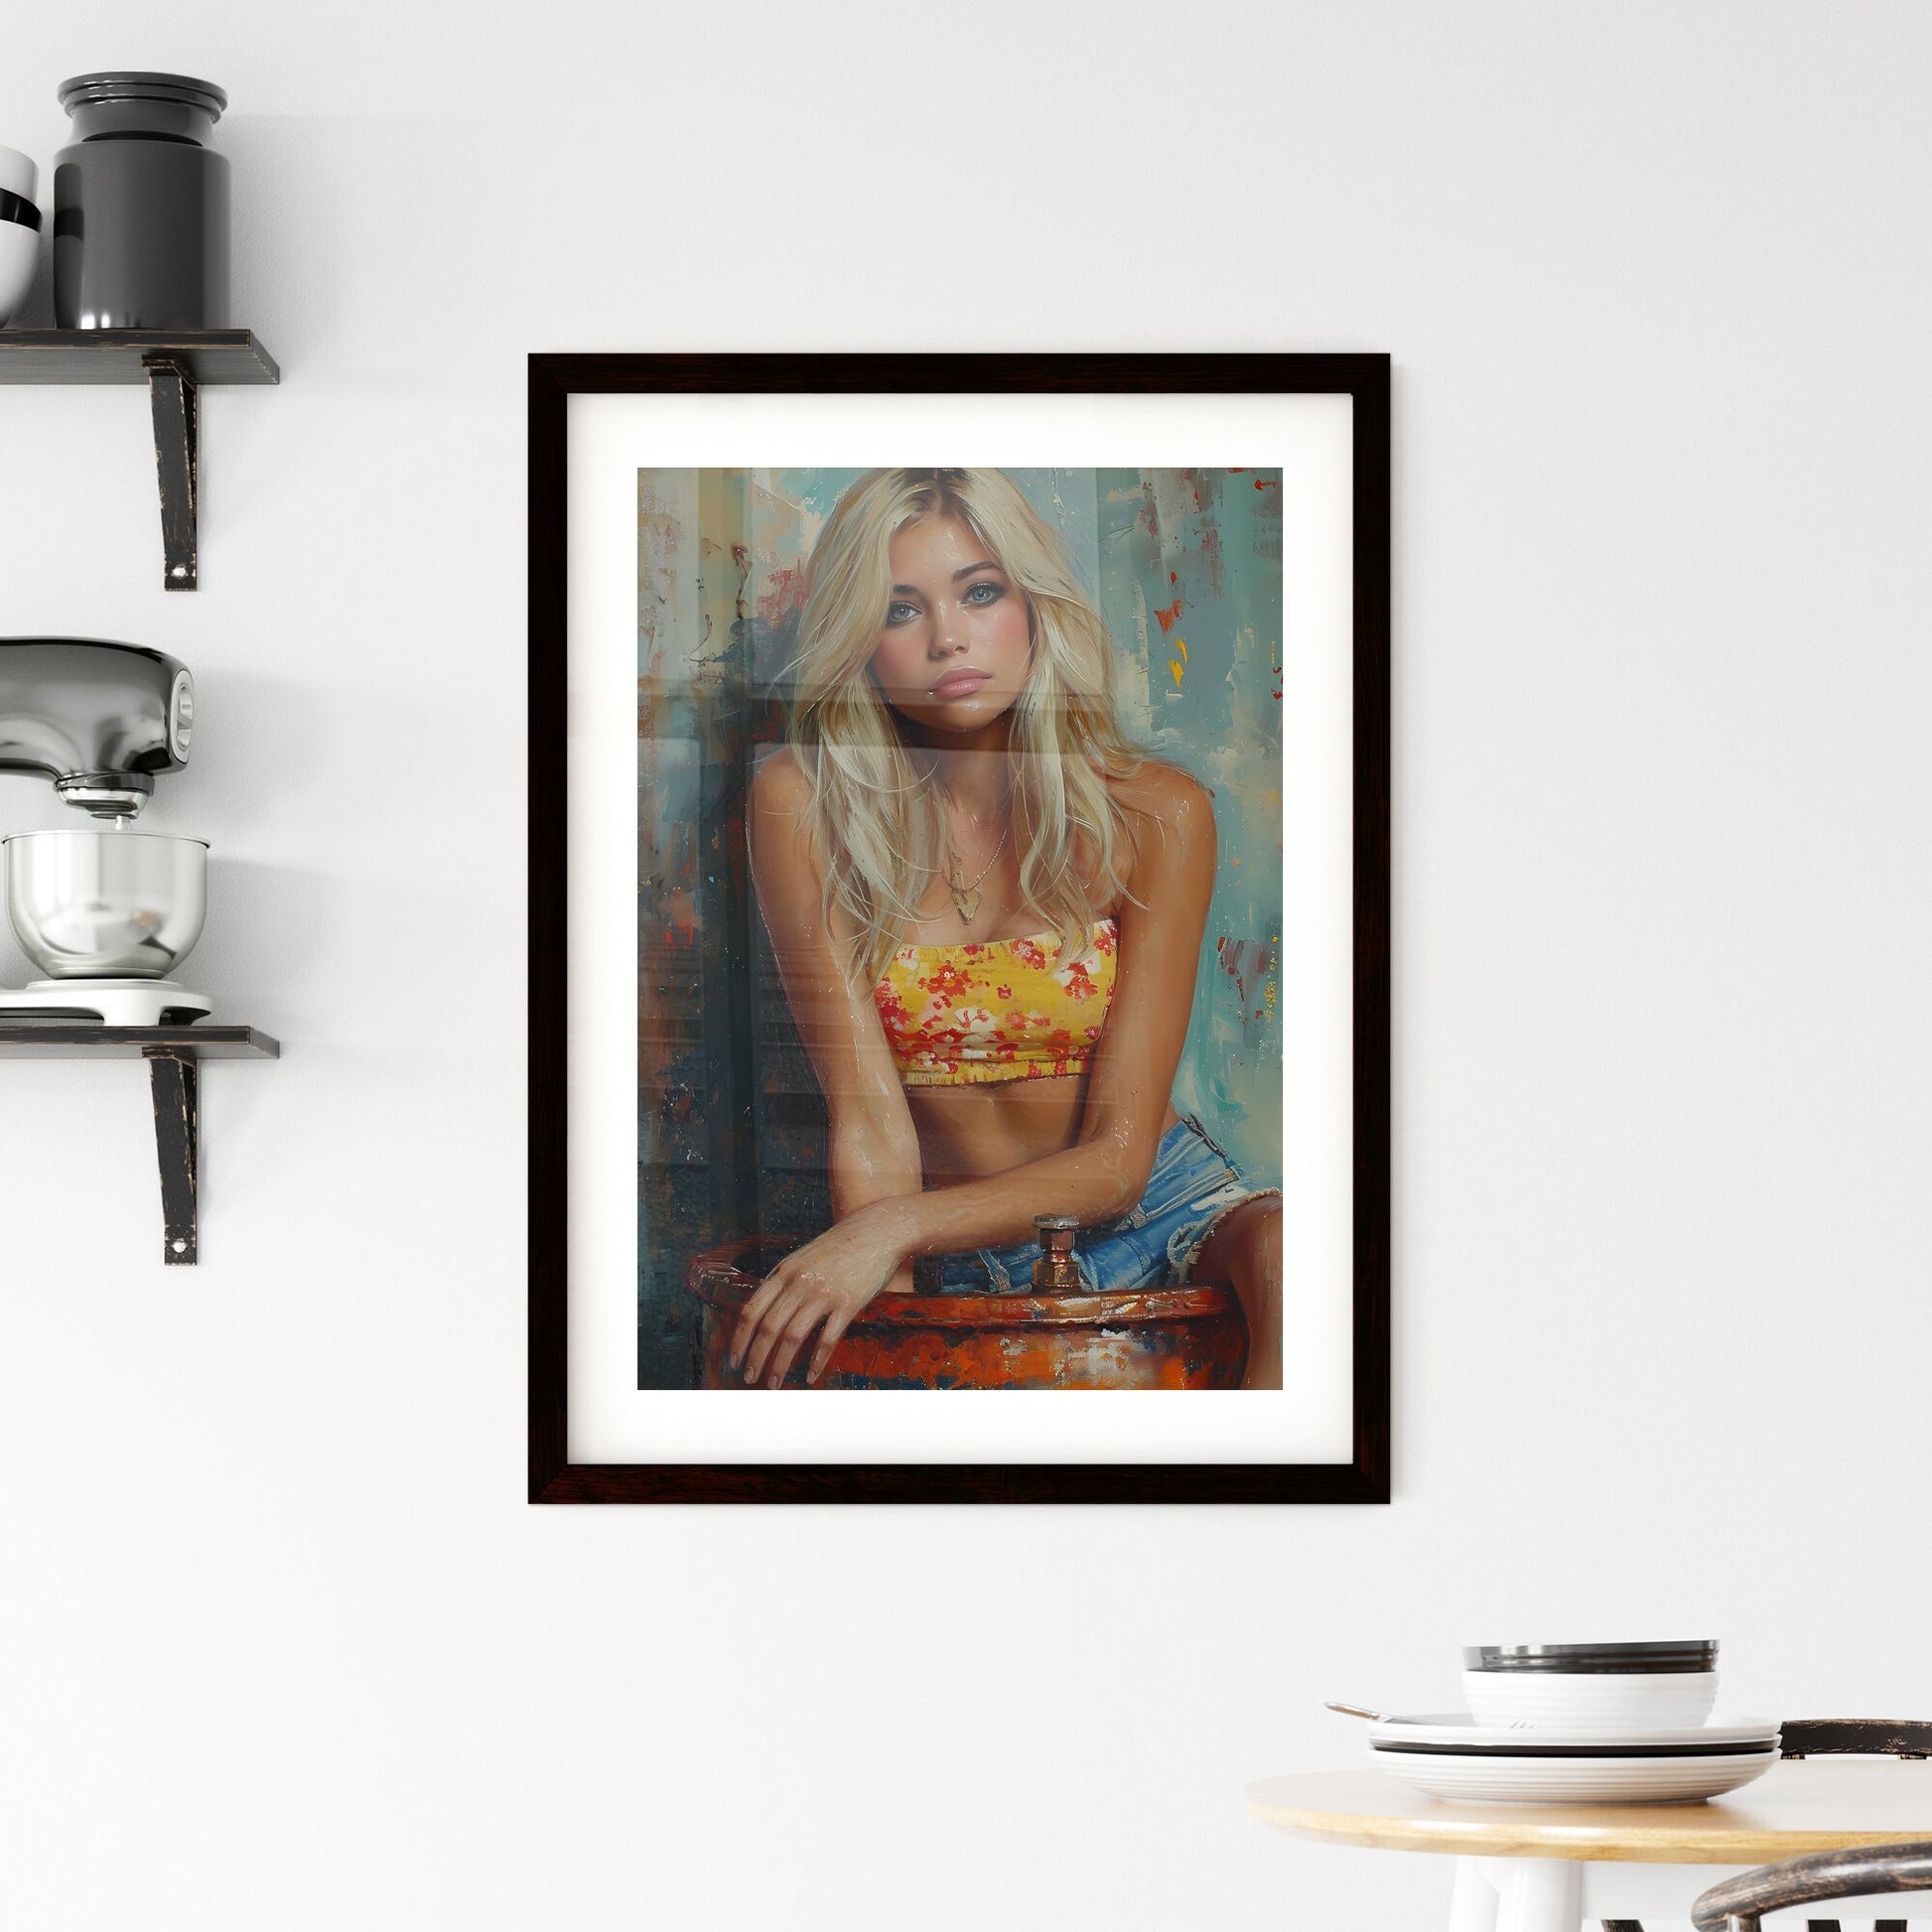 50s pin up girl sitting on top of a copper still wearing a short halter top and denim shorts - Art print of a woman sitting on a barrel Default Title